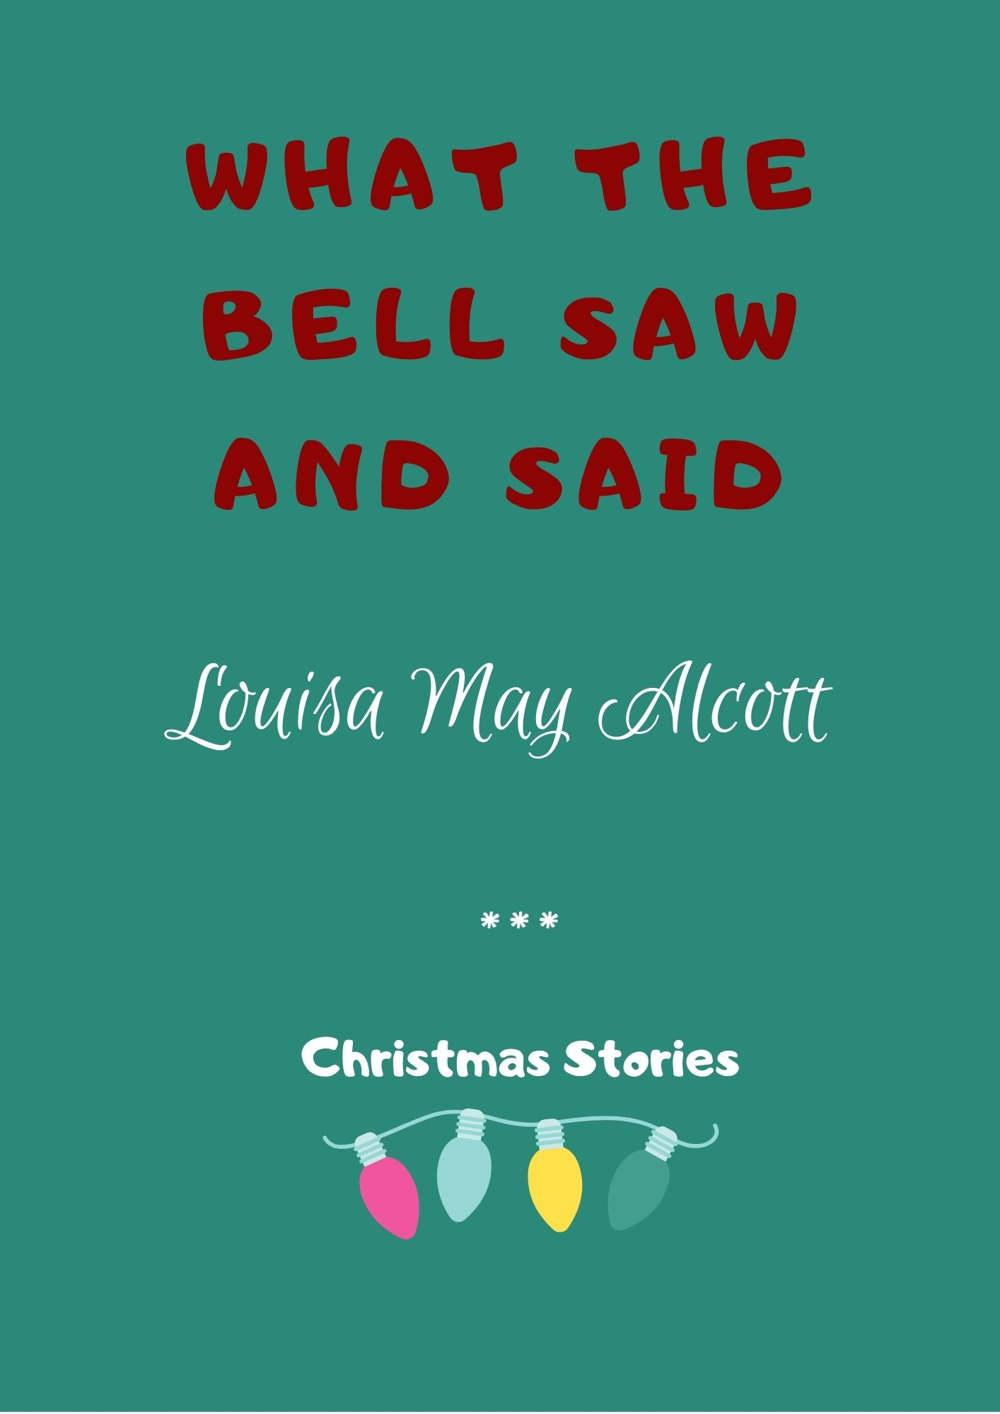 What the Bell Saw and Said by Louisa May Alcott